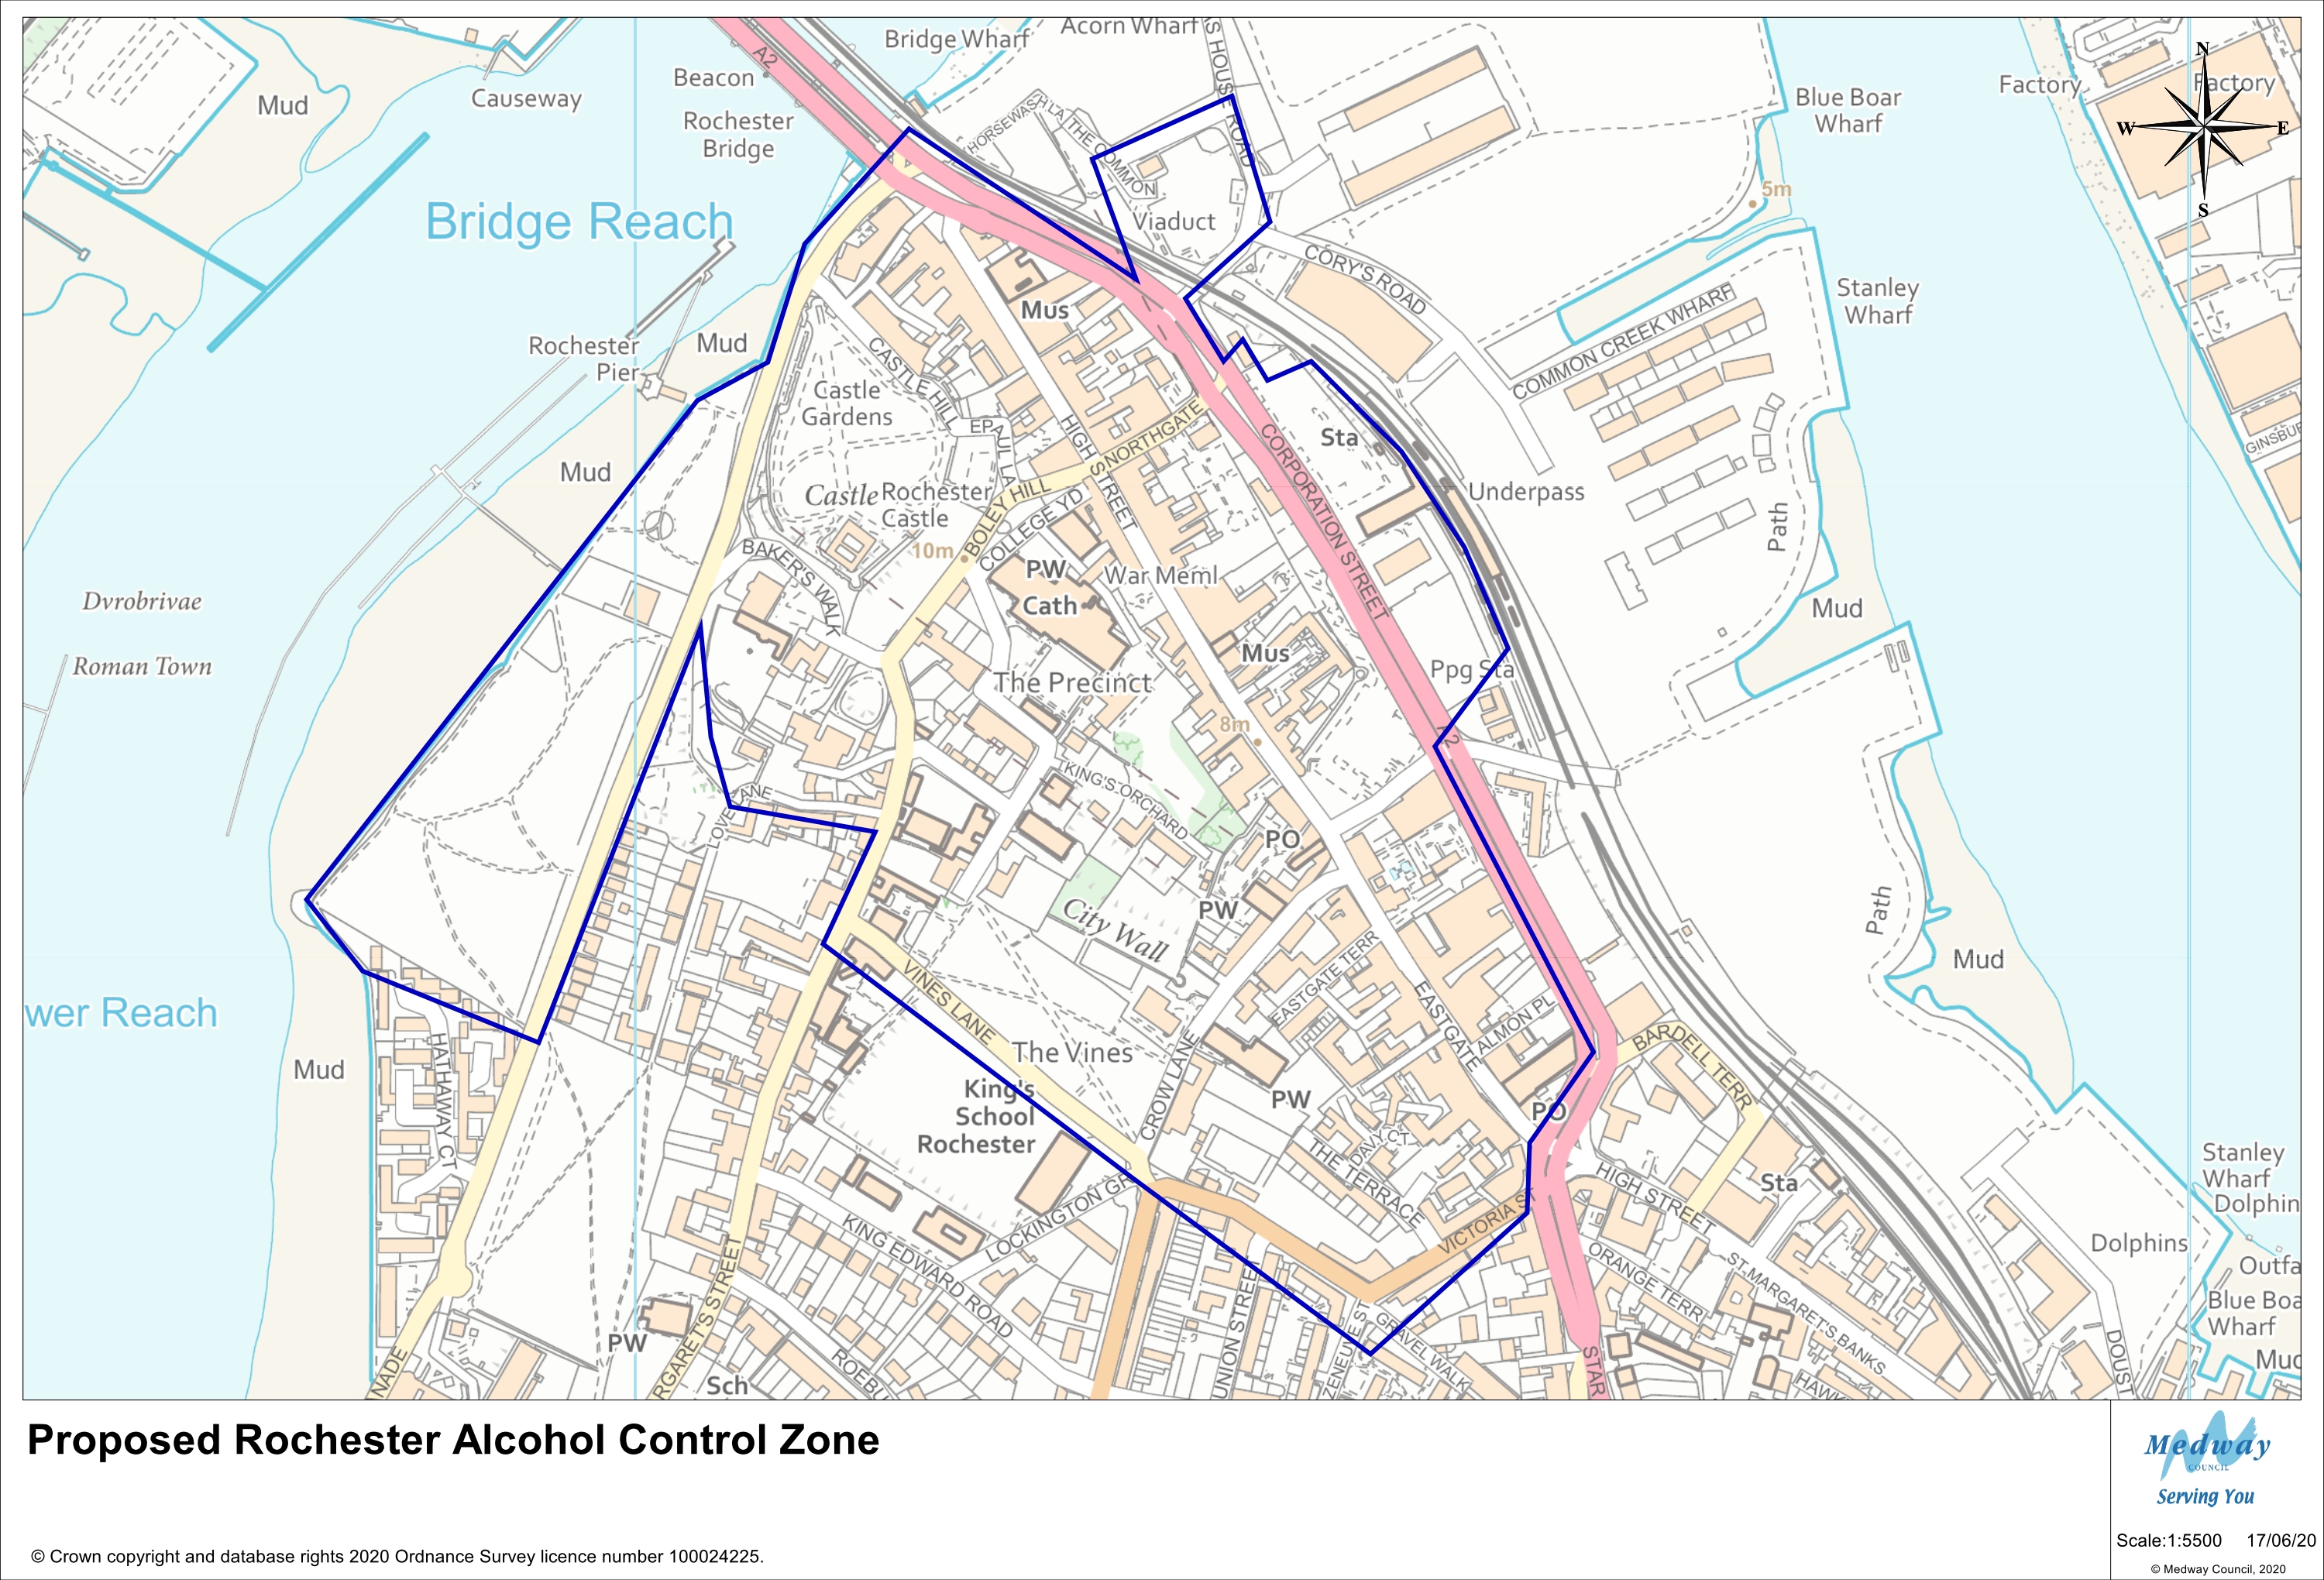 The proposed Rochester Alcohol Control Zone covers Rochester Town Centre. Beginning in The Esplanade the proposed zone includes the green space by the river, heading north to Rochester Bridge. The zone then heads east along Corporation Street taking in Acorn Wharf and Rochester Station. At Blue Boar Lane the zone crosses Corporation Street and takes in the buildings to the south of this boundary and follows along Star Hill and along Victoria Street. The proposed zone then heads along East Row and The Vines before heading back towards The Esplanade.